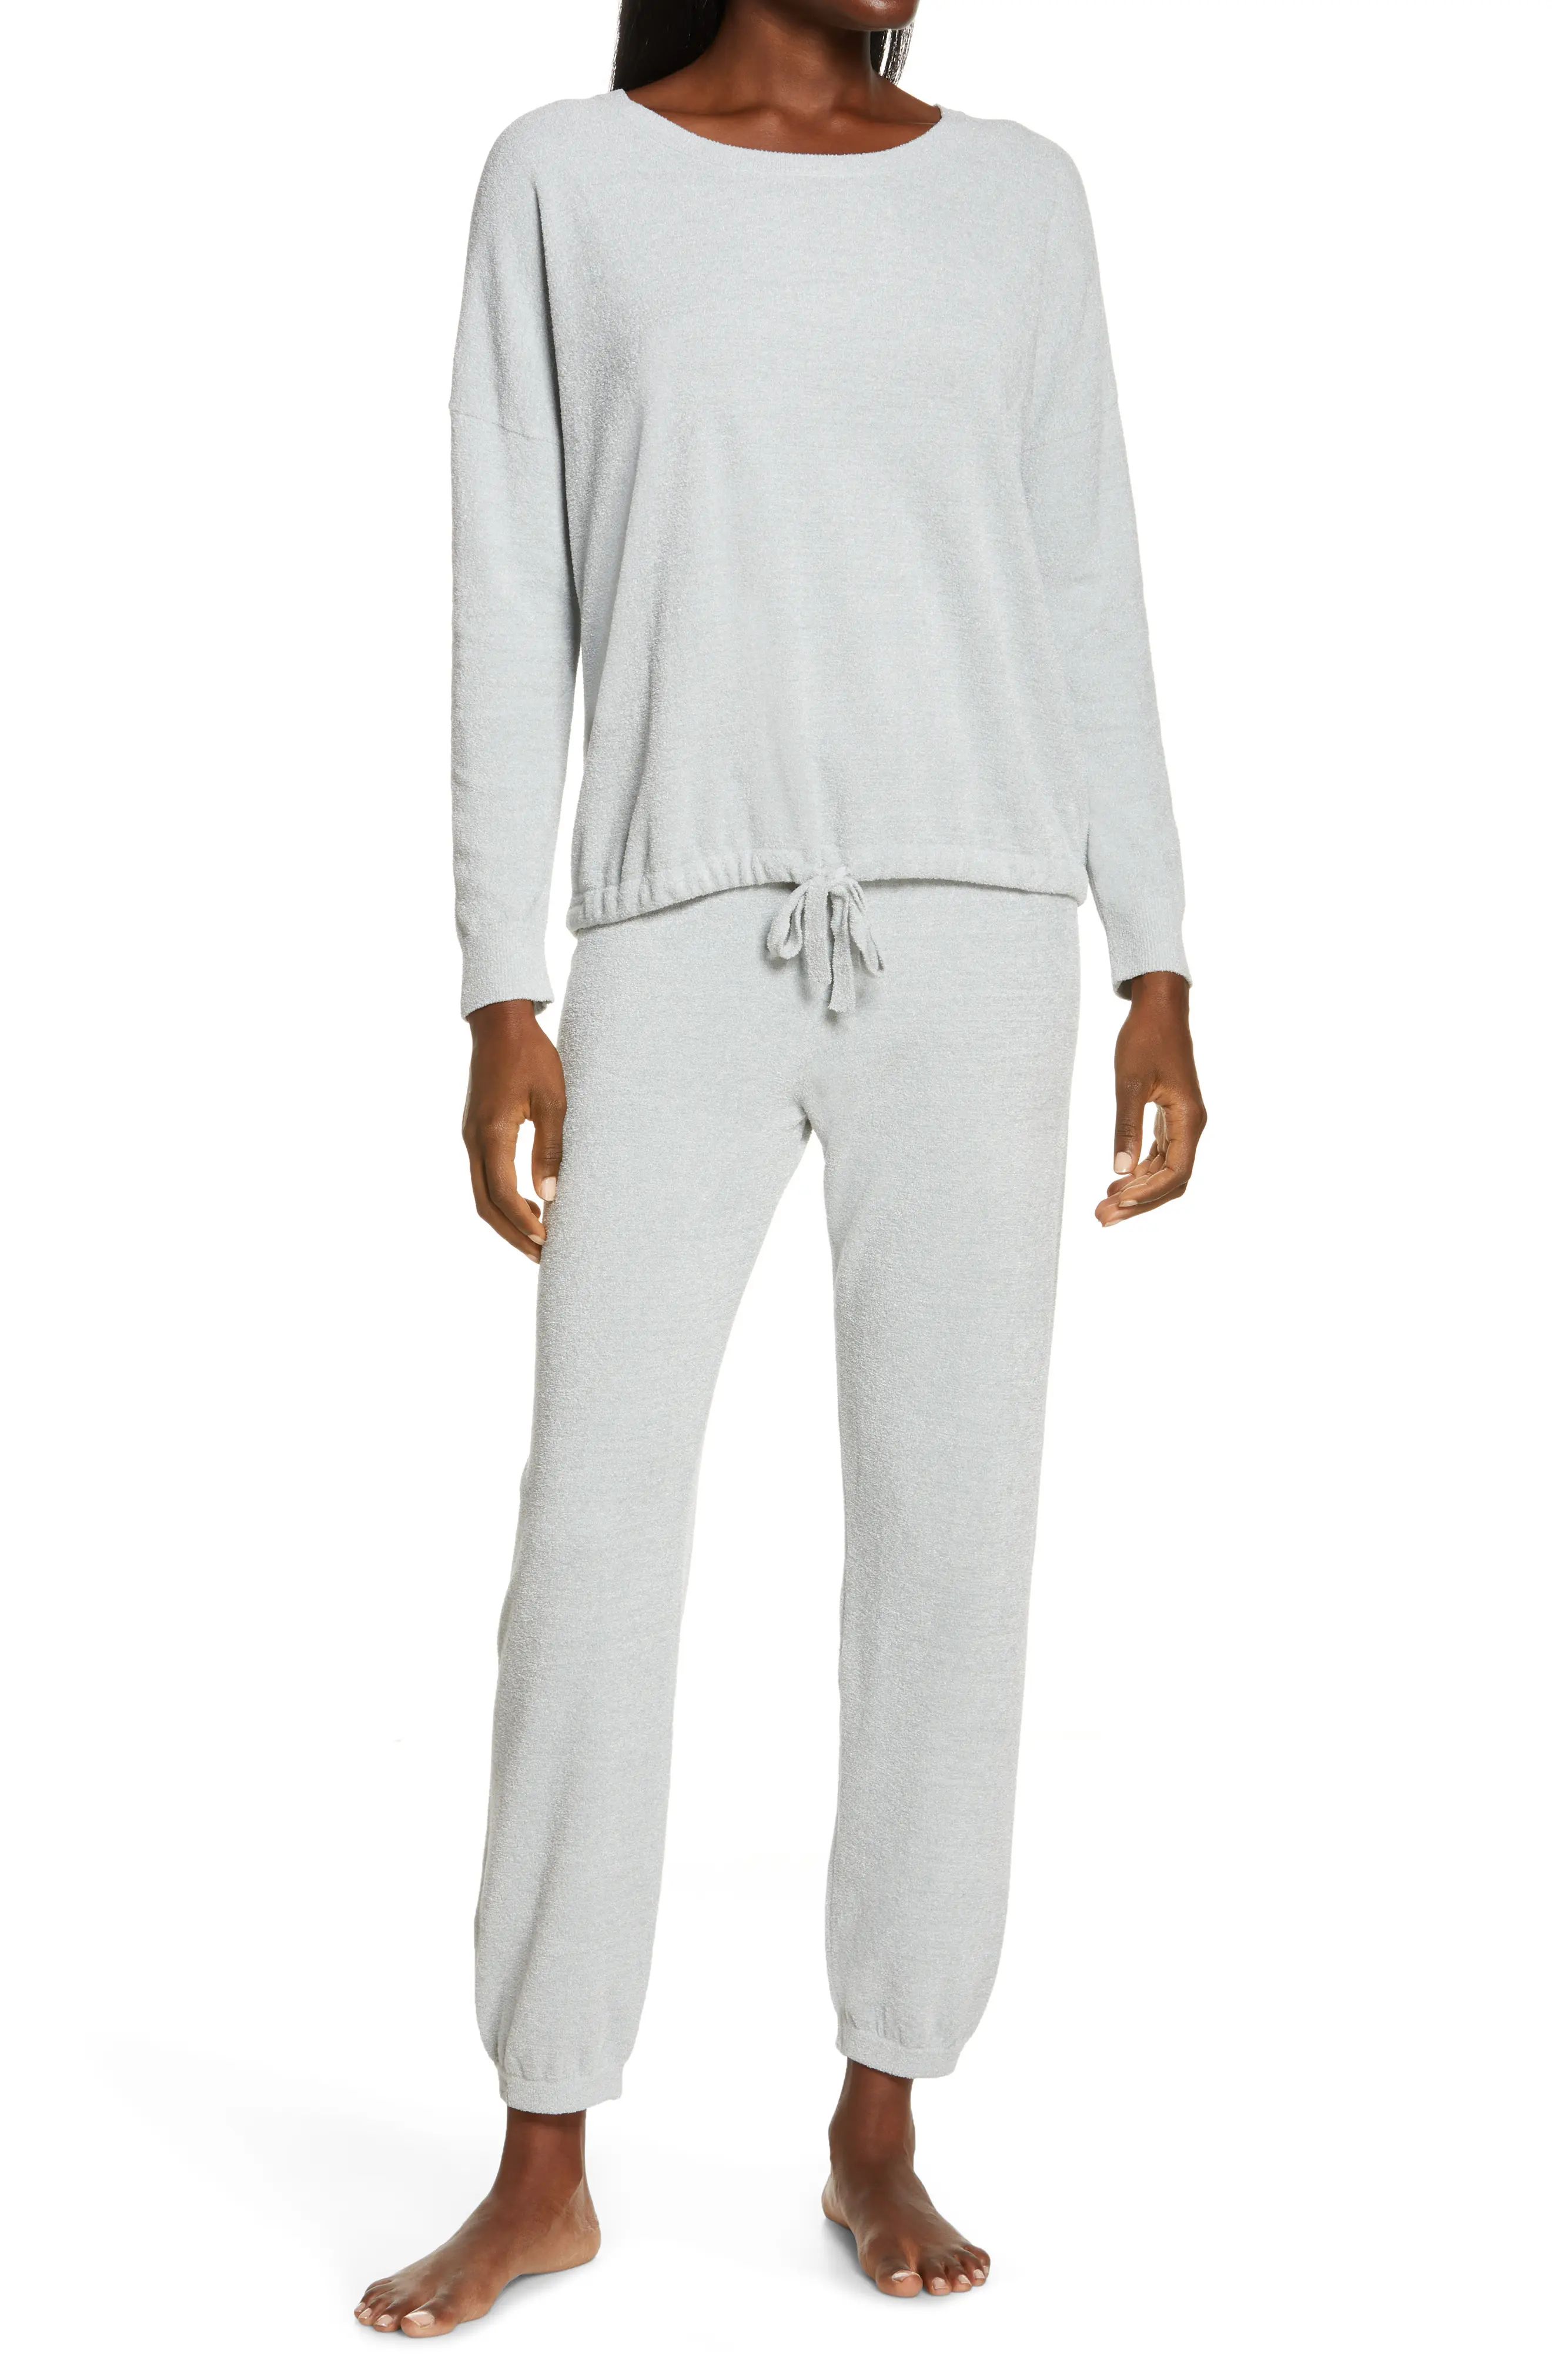 Barefoot Dreams(R) CozyChic(TM) Luxe Long Sleeve Pajamas in Ocean at Nordstrom, Size Large | Nordstrom